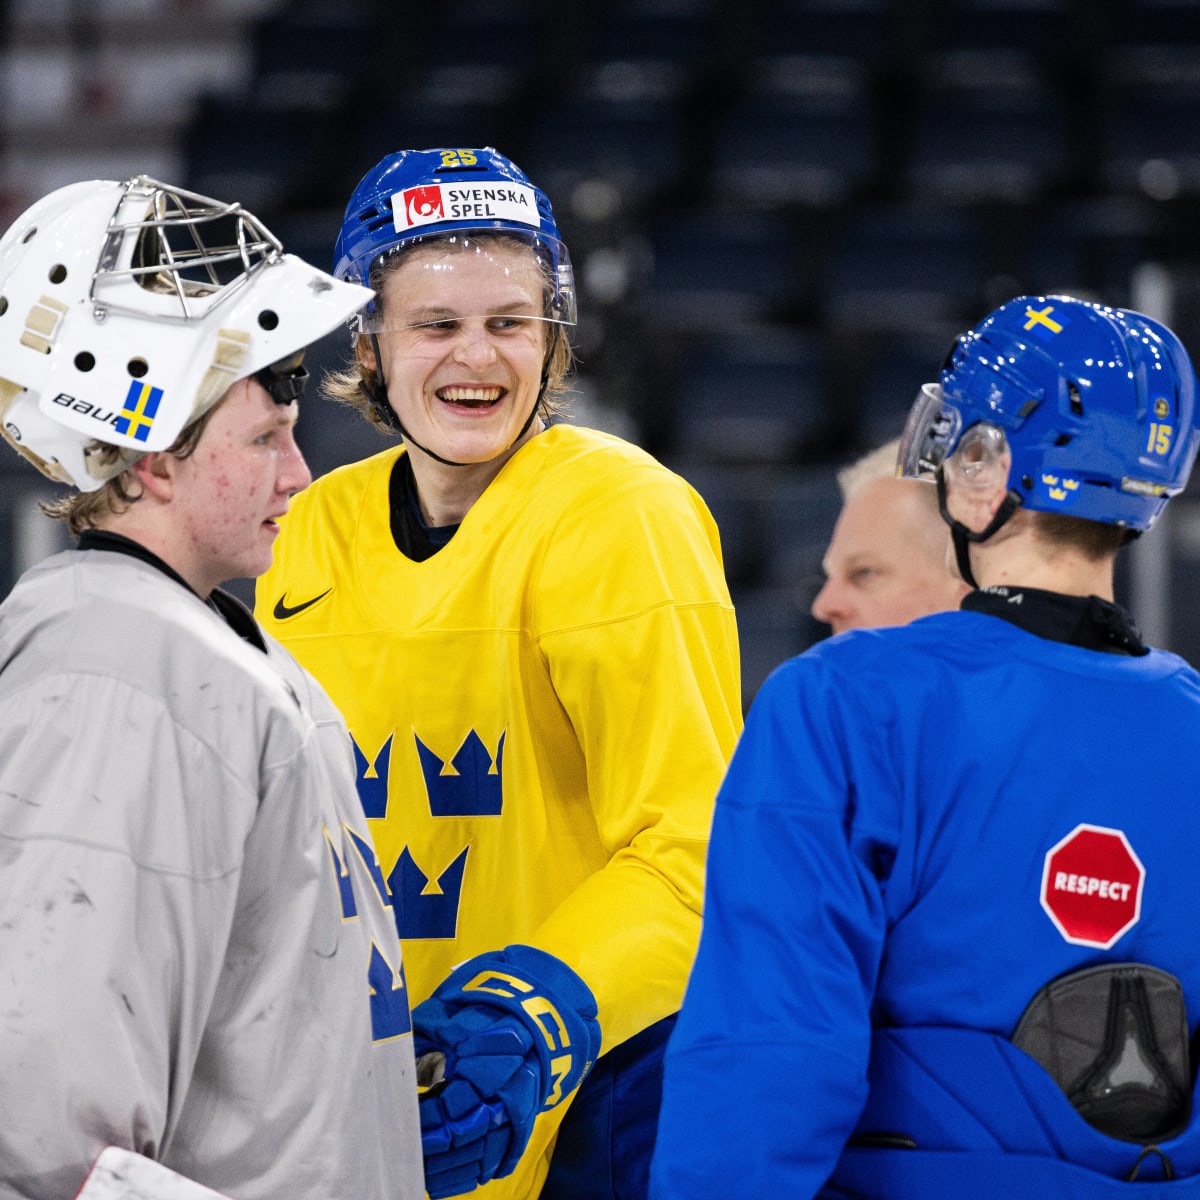 Sweden Czechia Free Live Stream IIHF Junior Hockey Championship - How to Watch and Stream Major League and College Sports